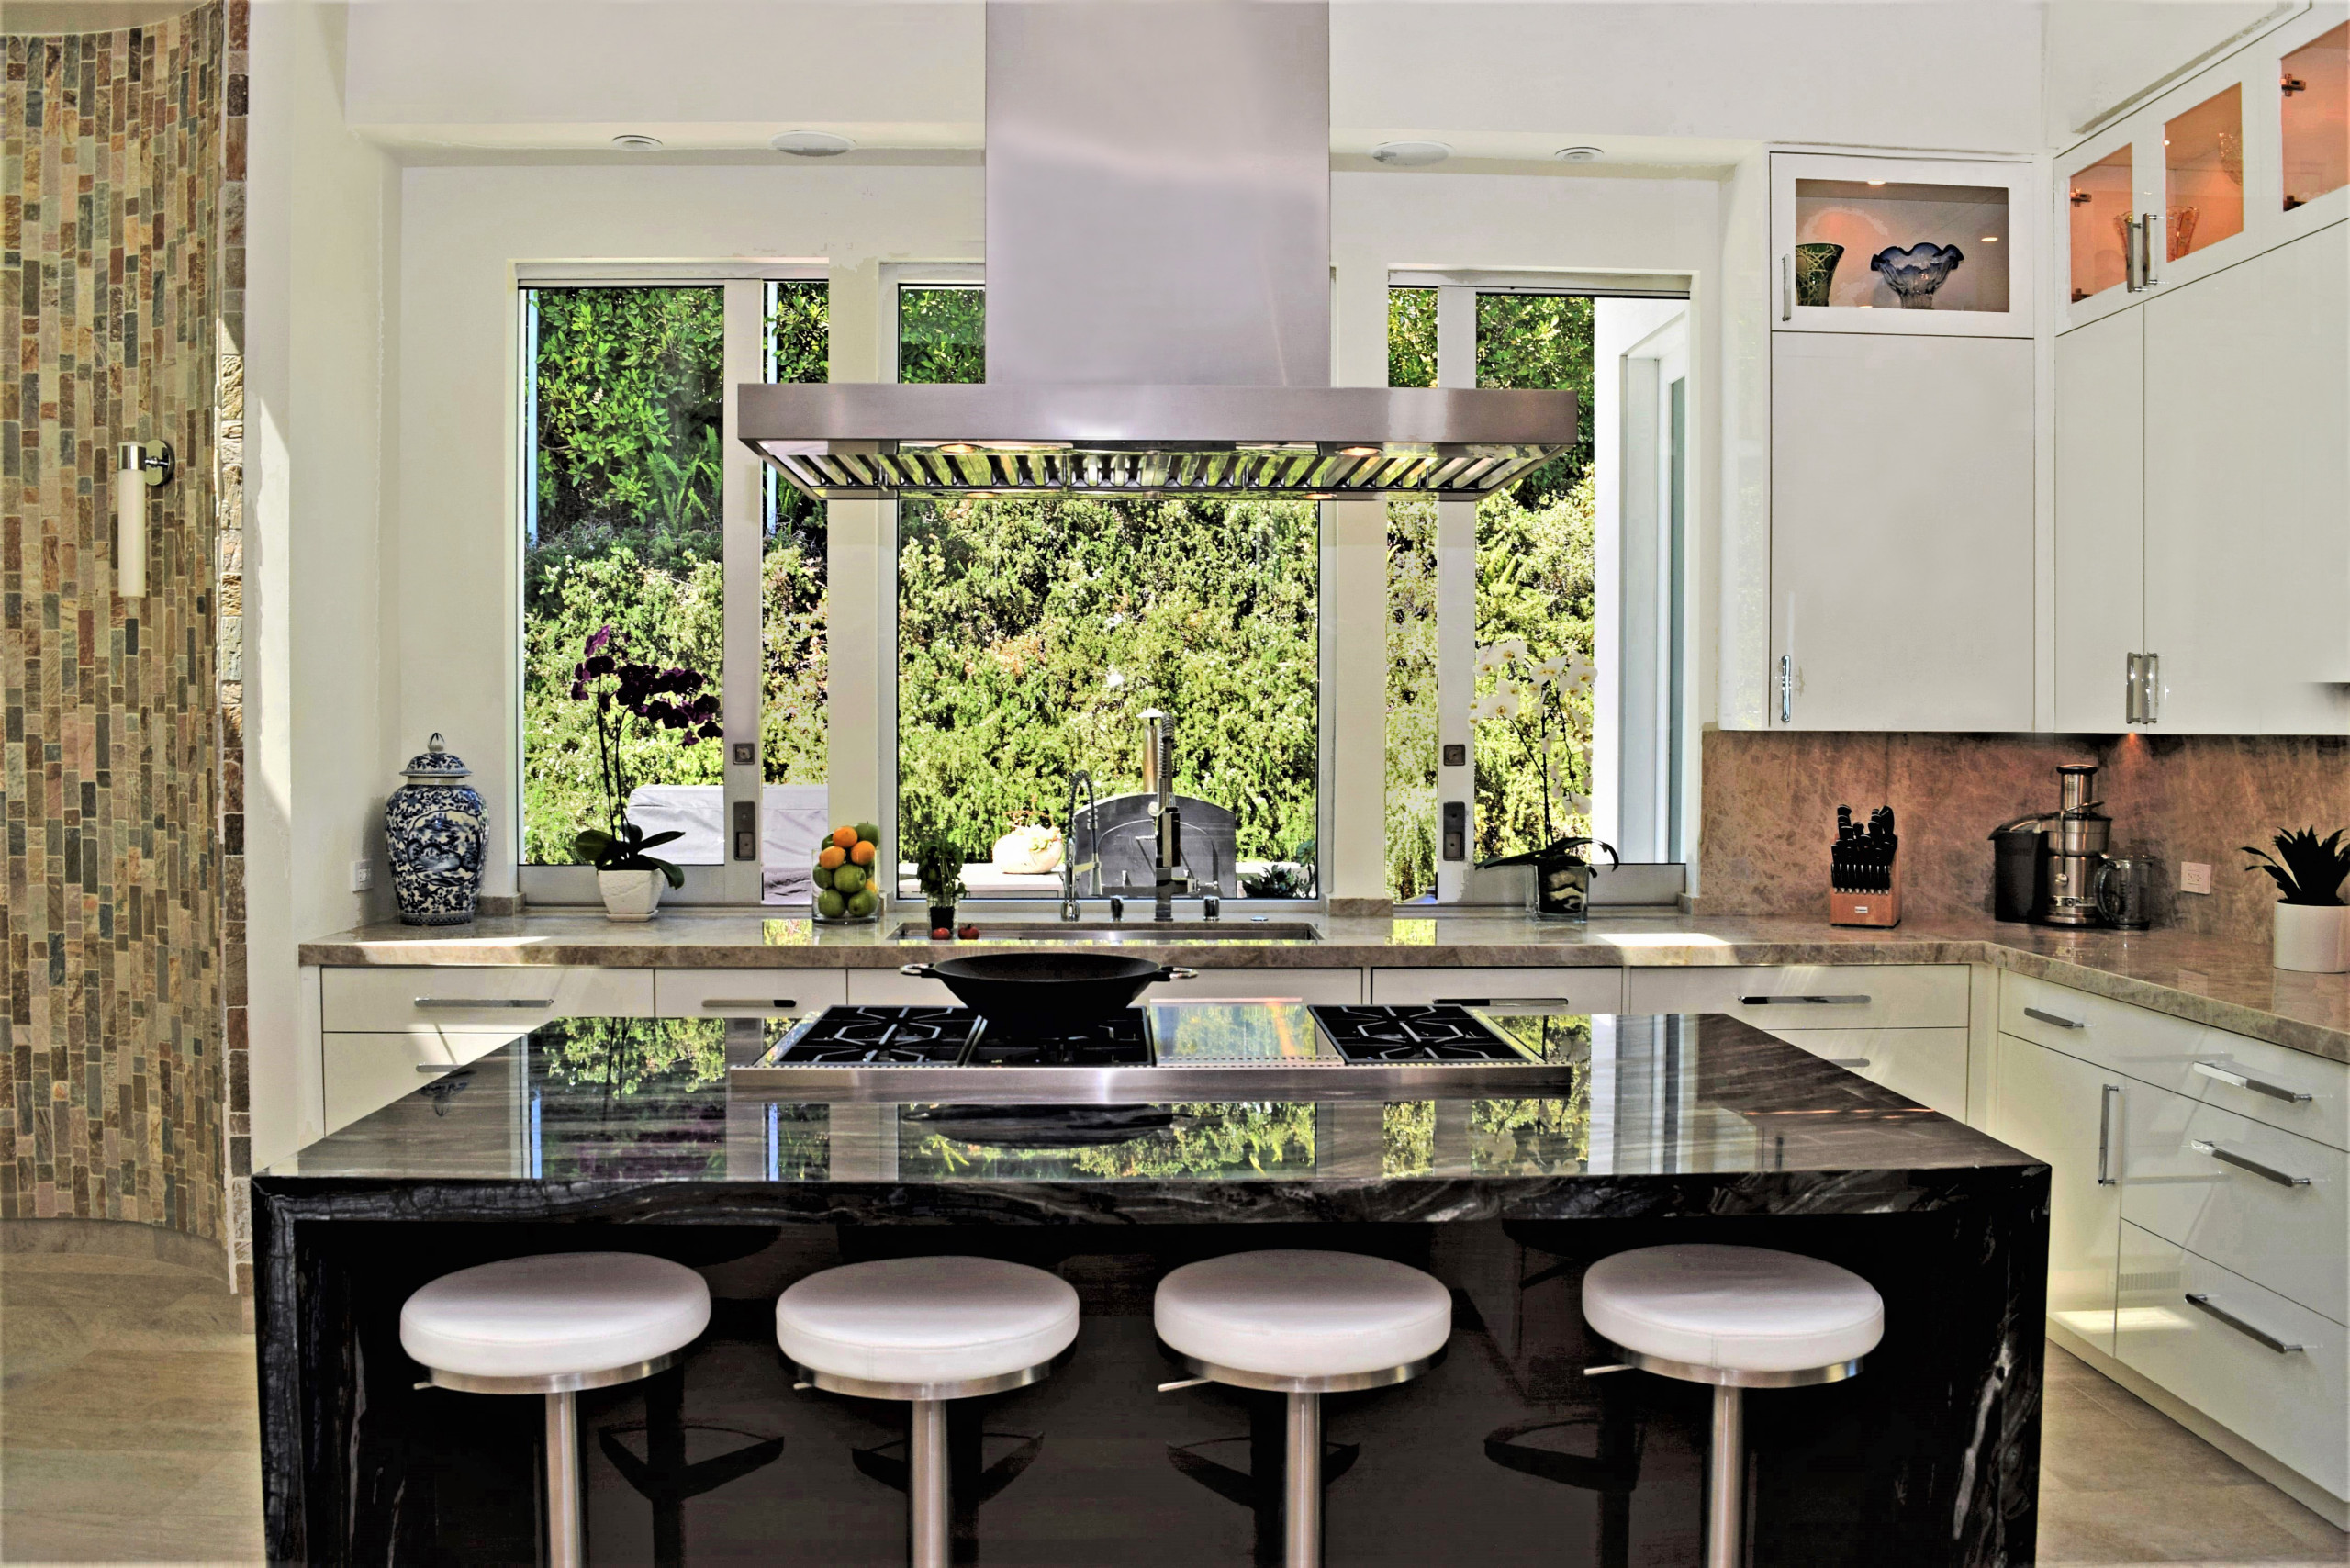 My Contemporary Kitchen Remodel For A Client in The Hollywood Hills Bird Streets